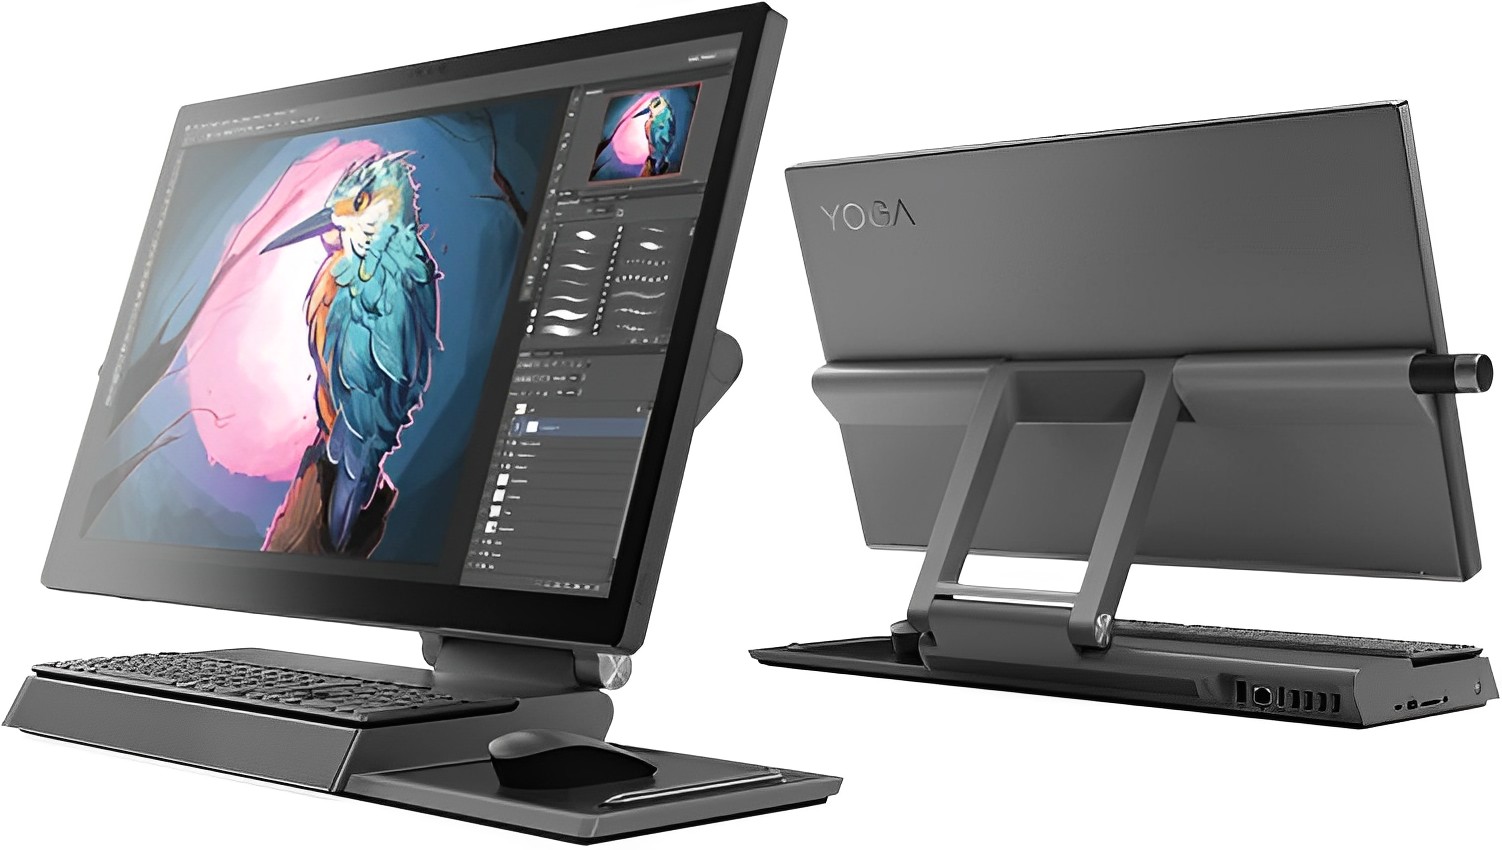 Lenovo Yoga A940 (28) All-in-One